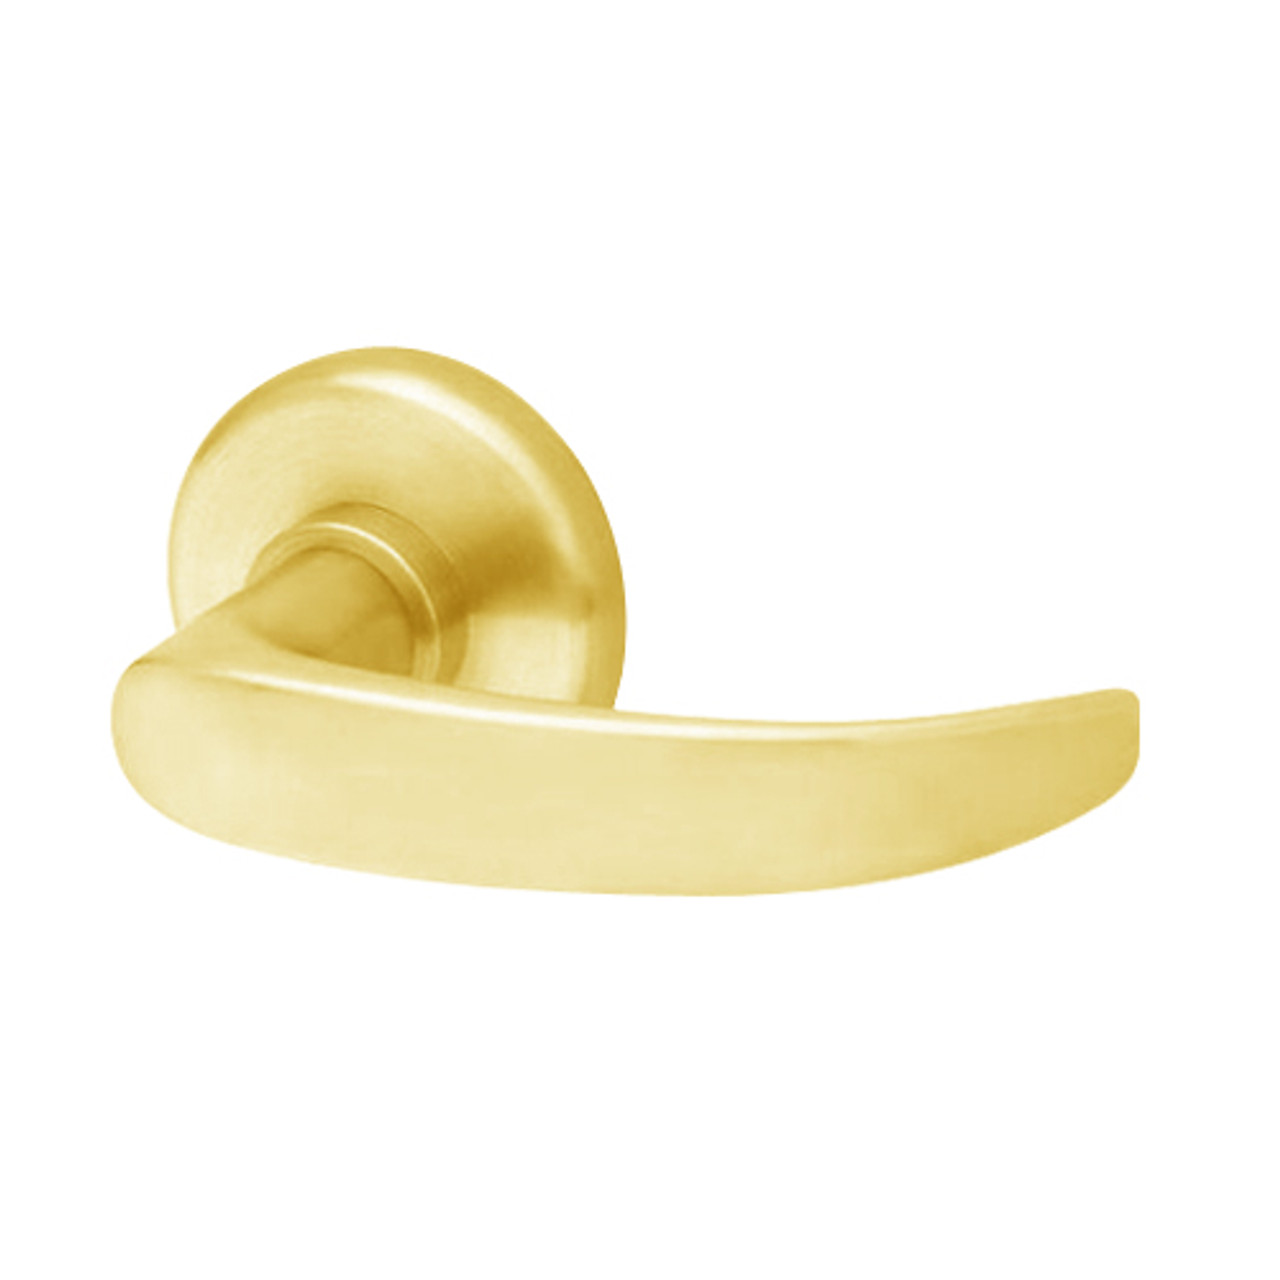 40HTKOS214S605 Best 40H Series Trim Kits Outside Lever w/ Cylinder with Curved Return Style in Bright Brass